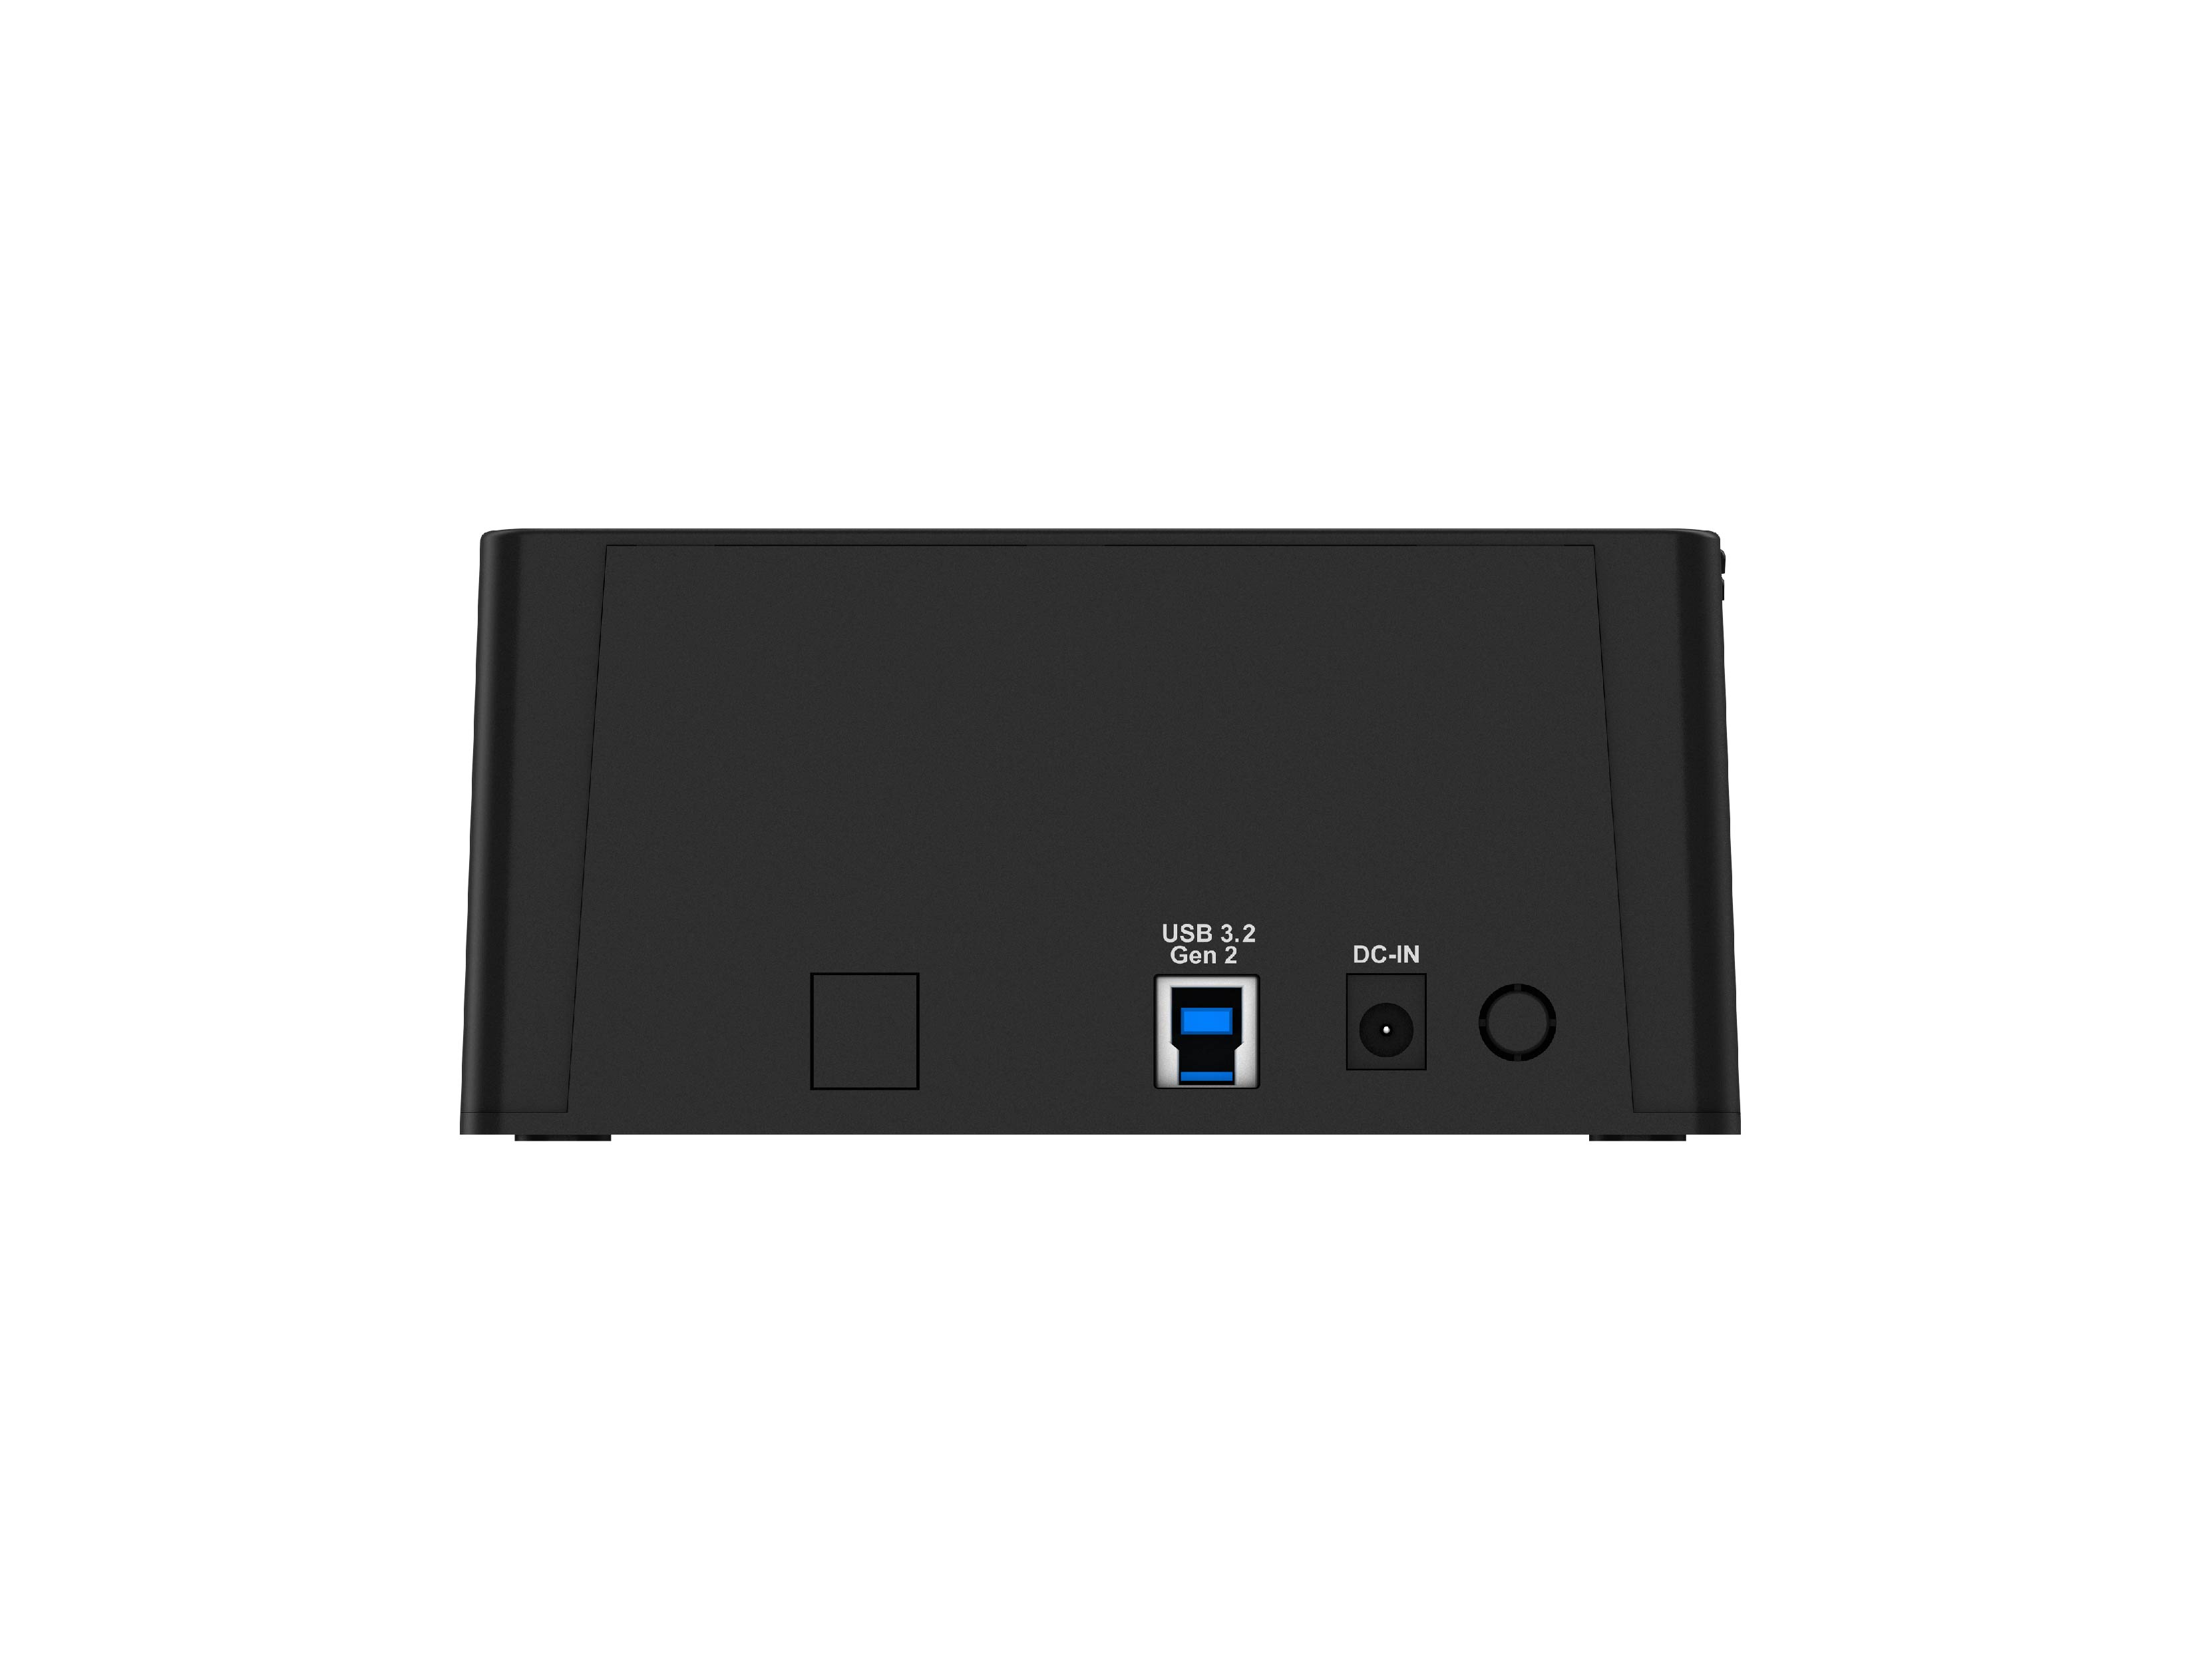 2 Bay SATA SSD/HDD Duplicator Dock (SI-7928USJ3-D), applicable with 2x 3.5" or 2.5" SATA HDD/SSD, support PC mode & clone mode switchable, USB-B 5Gbps to host.